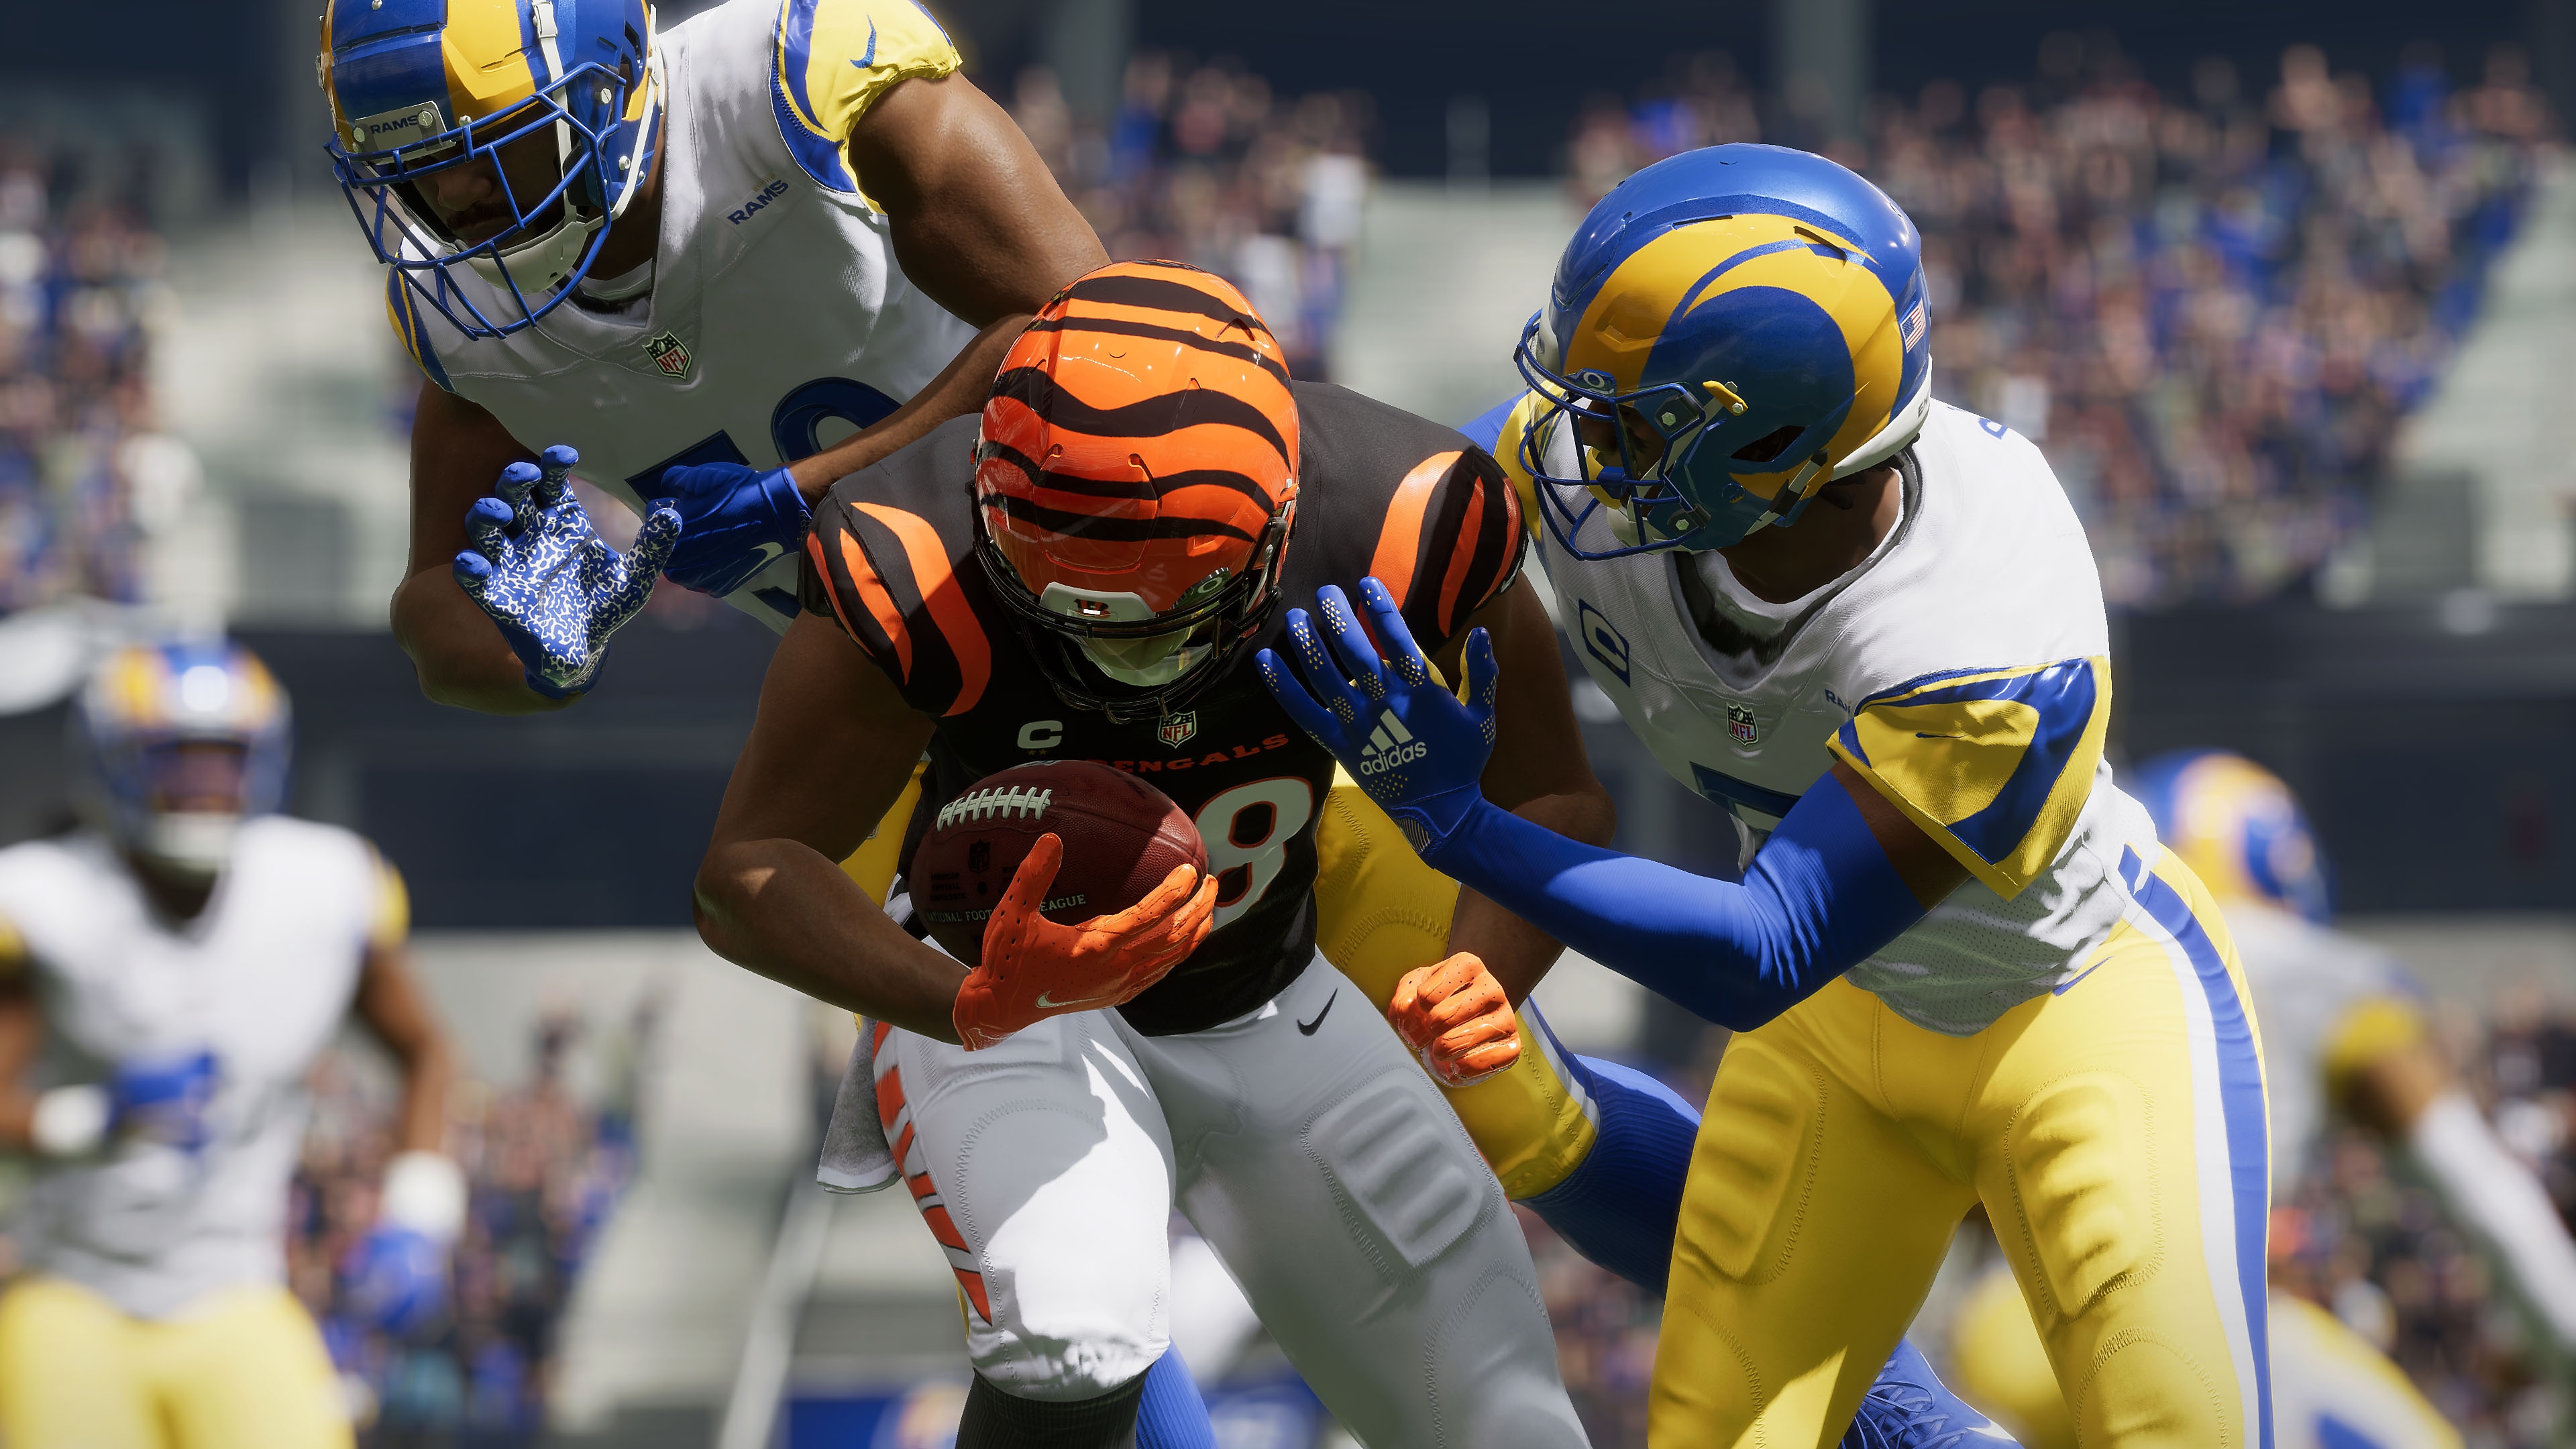 Madden 23 screenshot of player running with the football